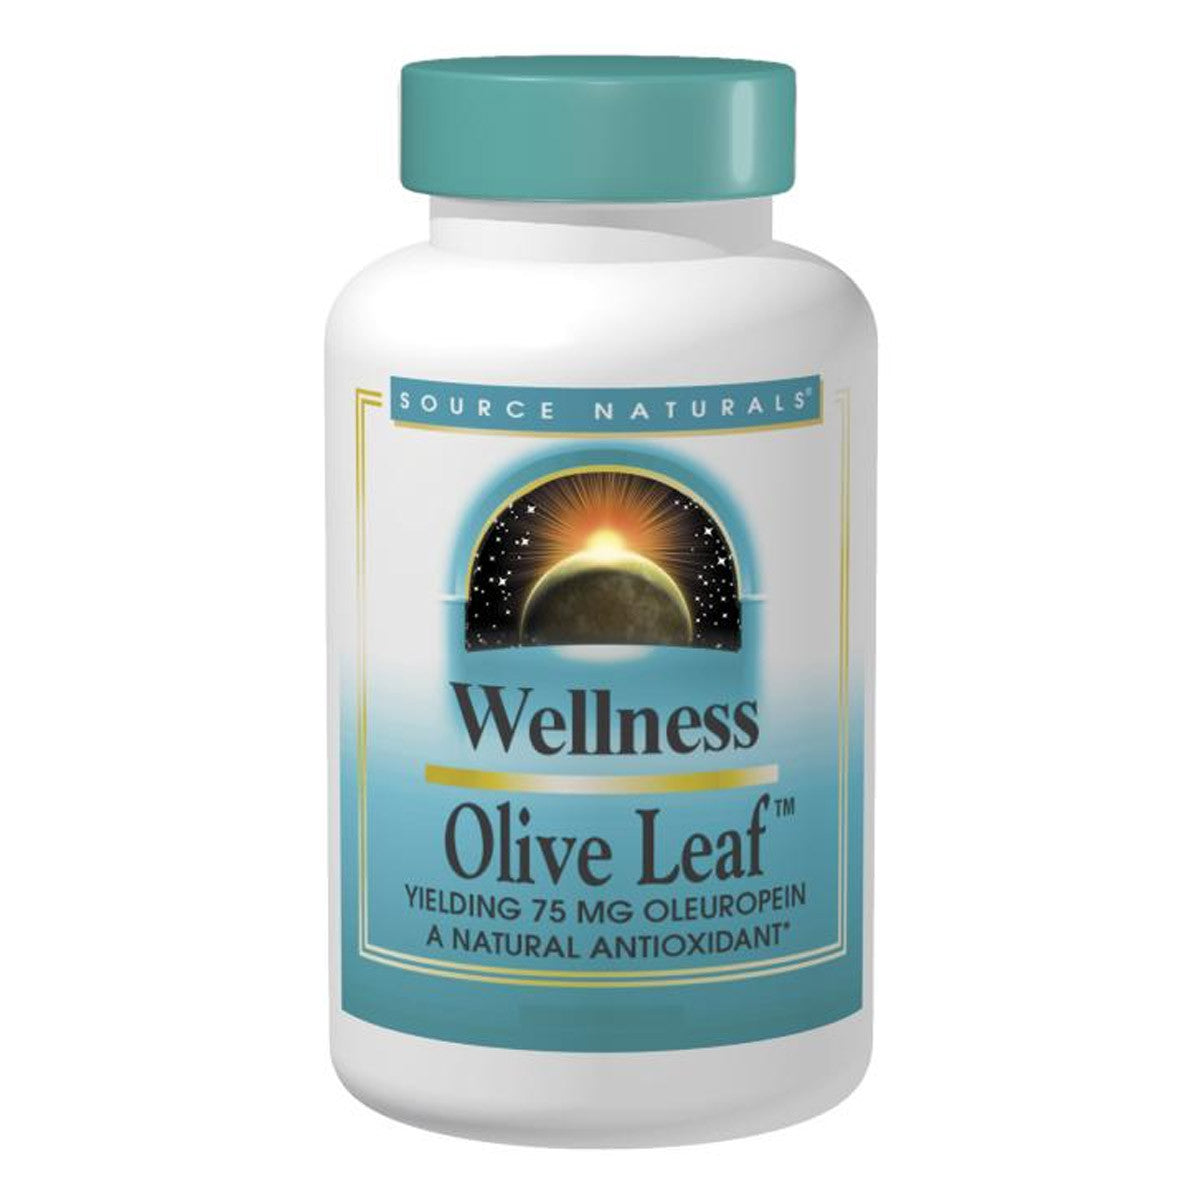 Primary image of Wellness Olive Leaf Extract 500mg